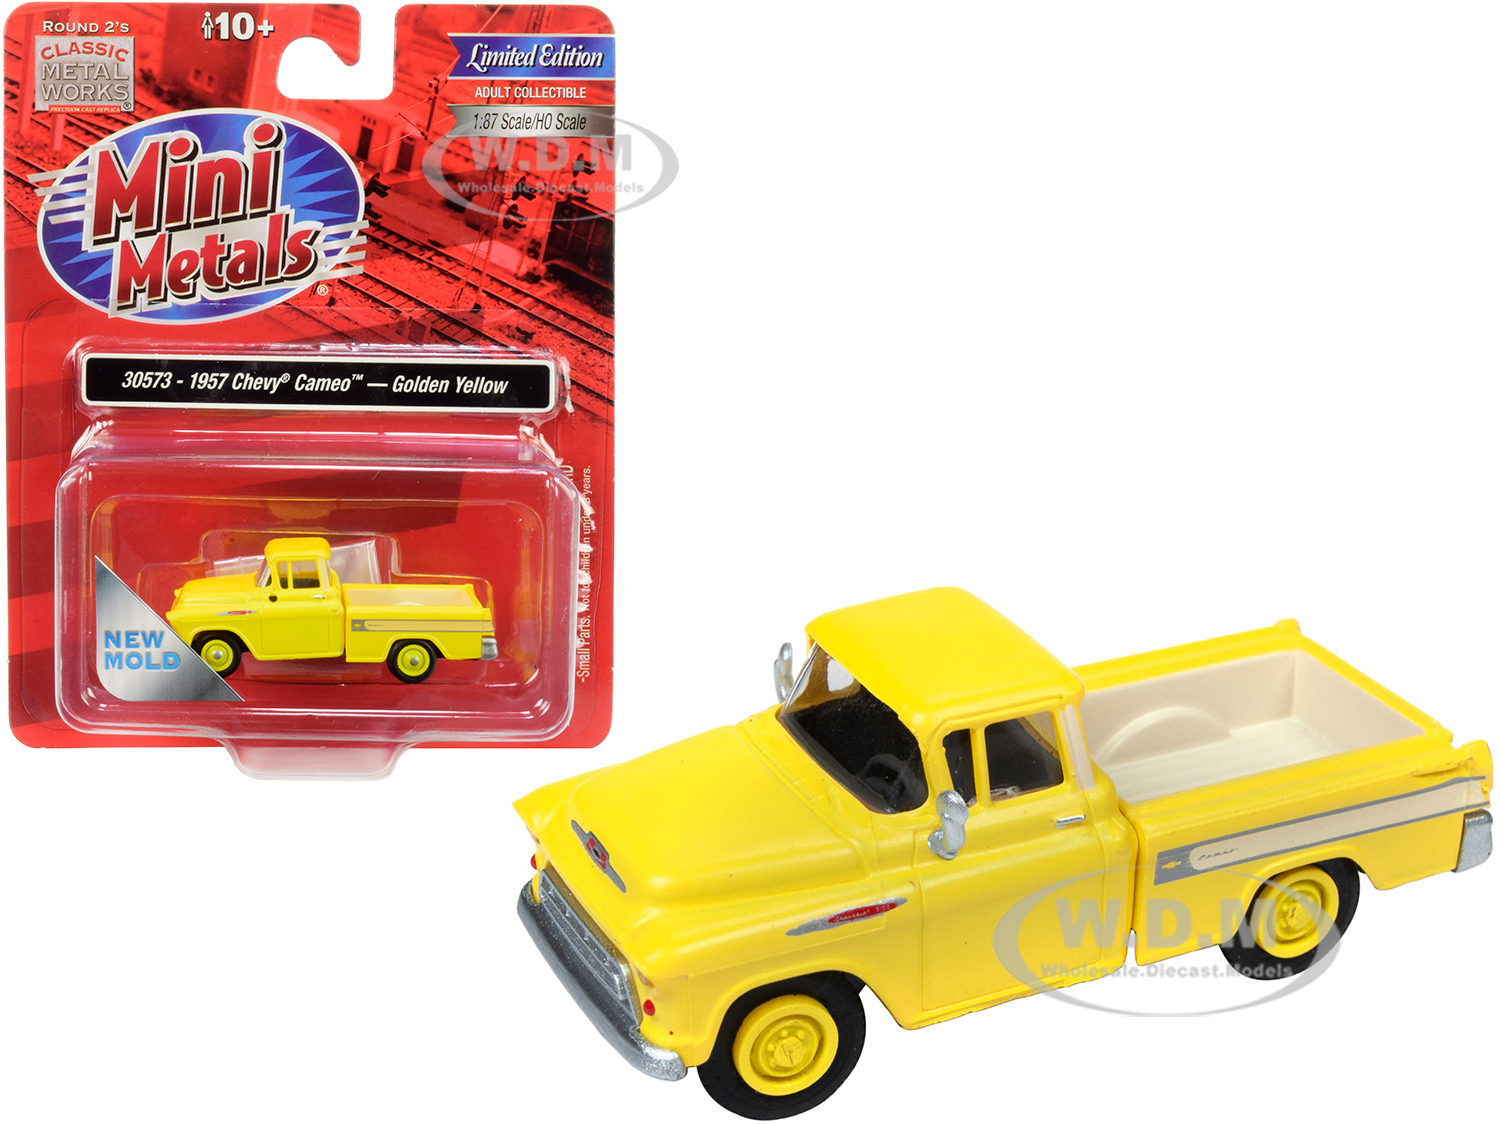 1957 Chevrolet Cameo Pickup Truck Golden Yellow 1/87 (ho) Scale Model Car By Classic Metal Works